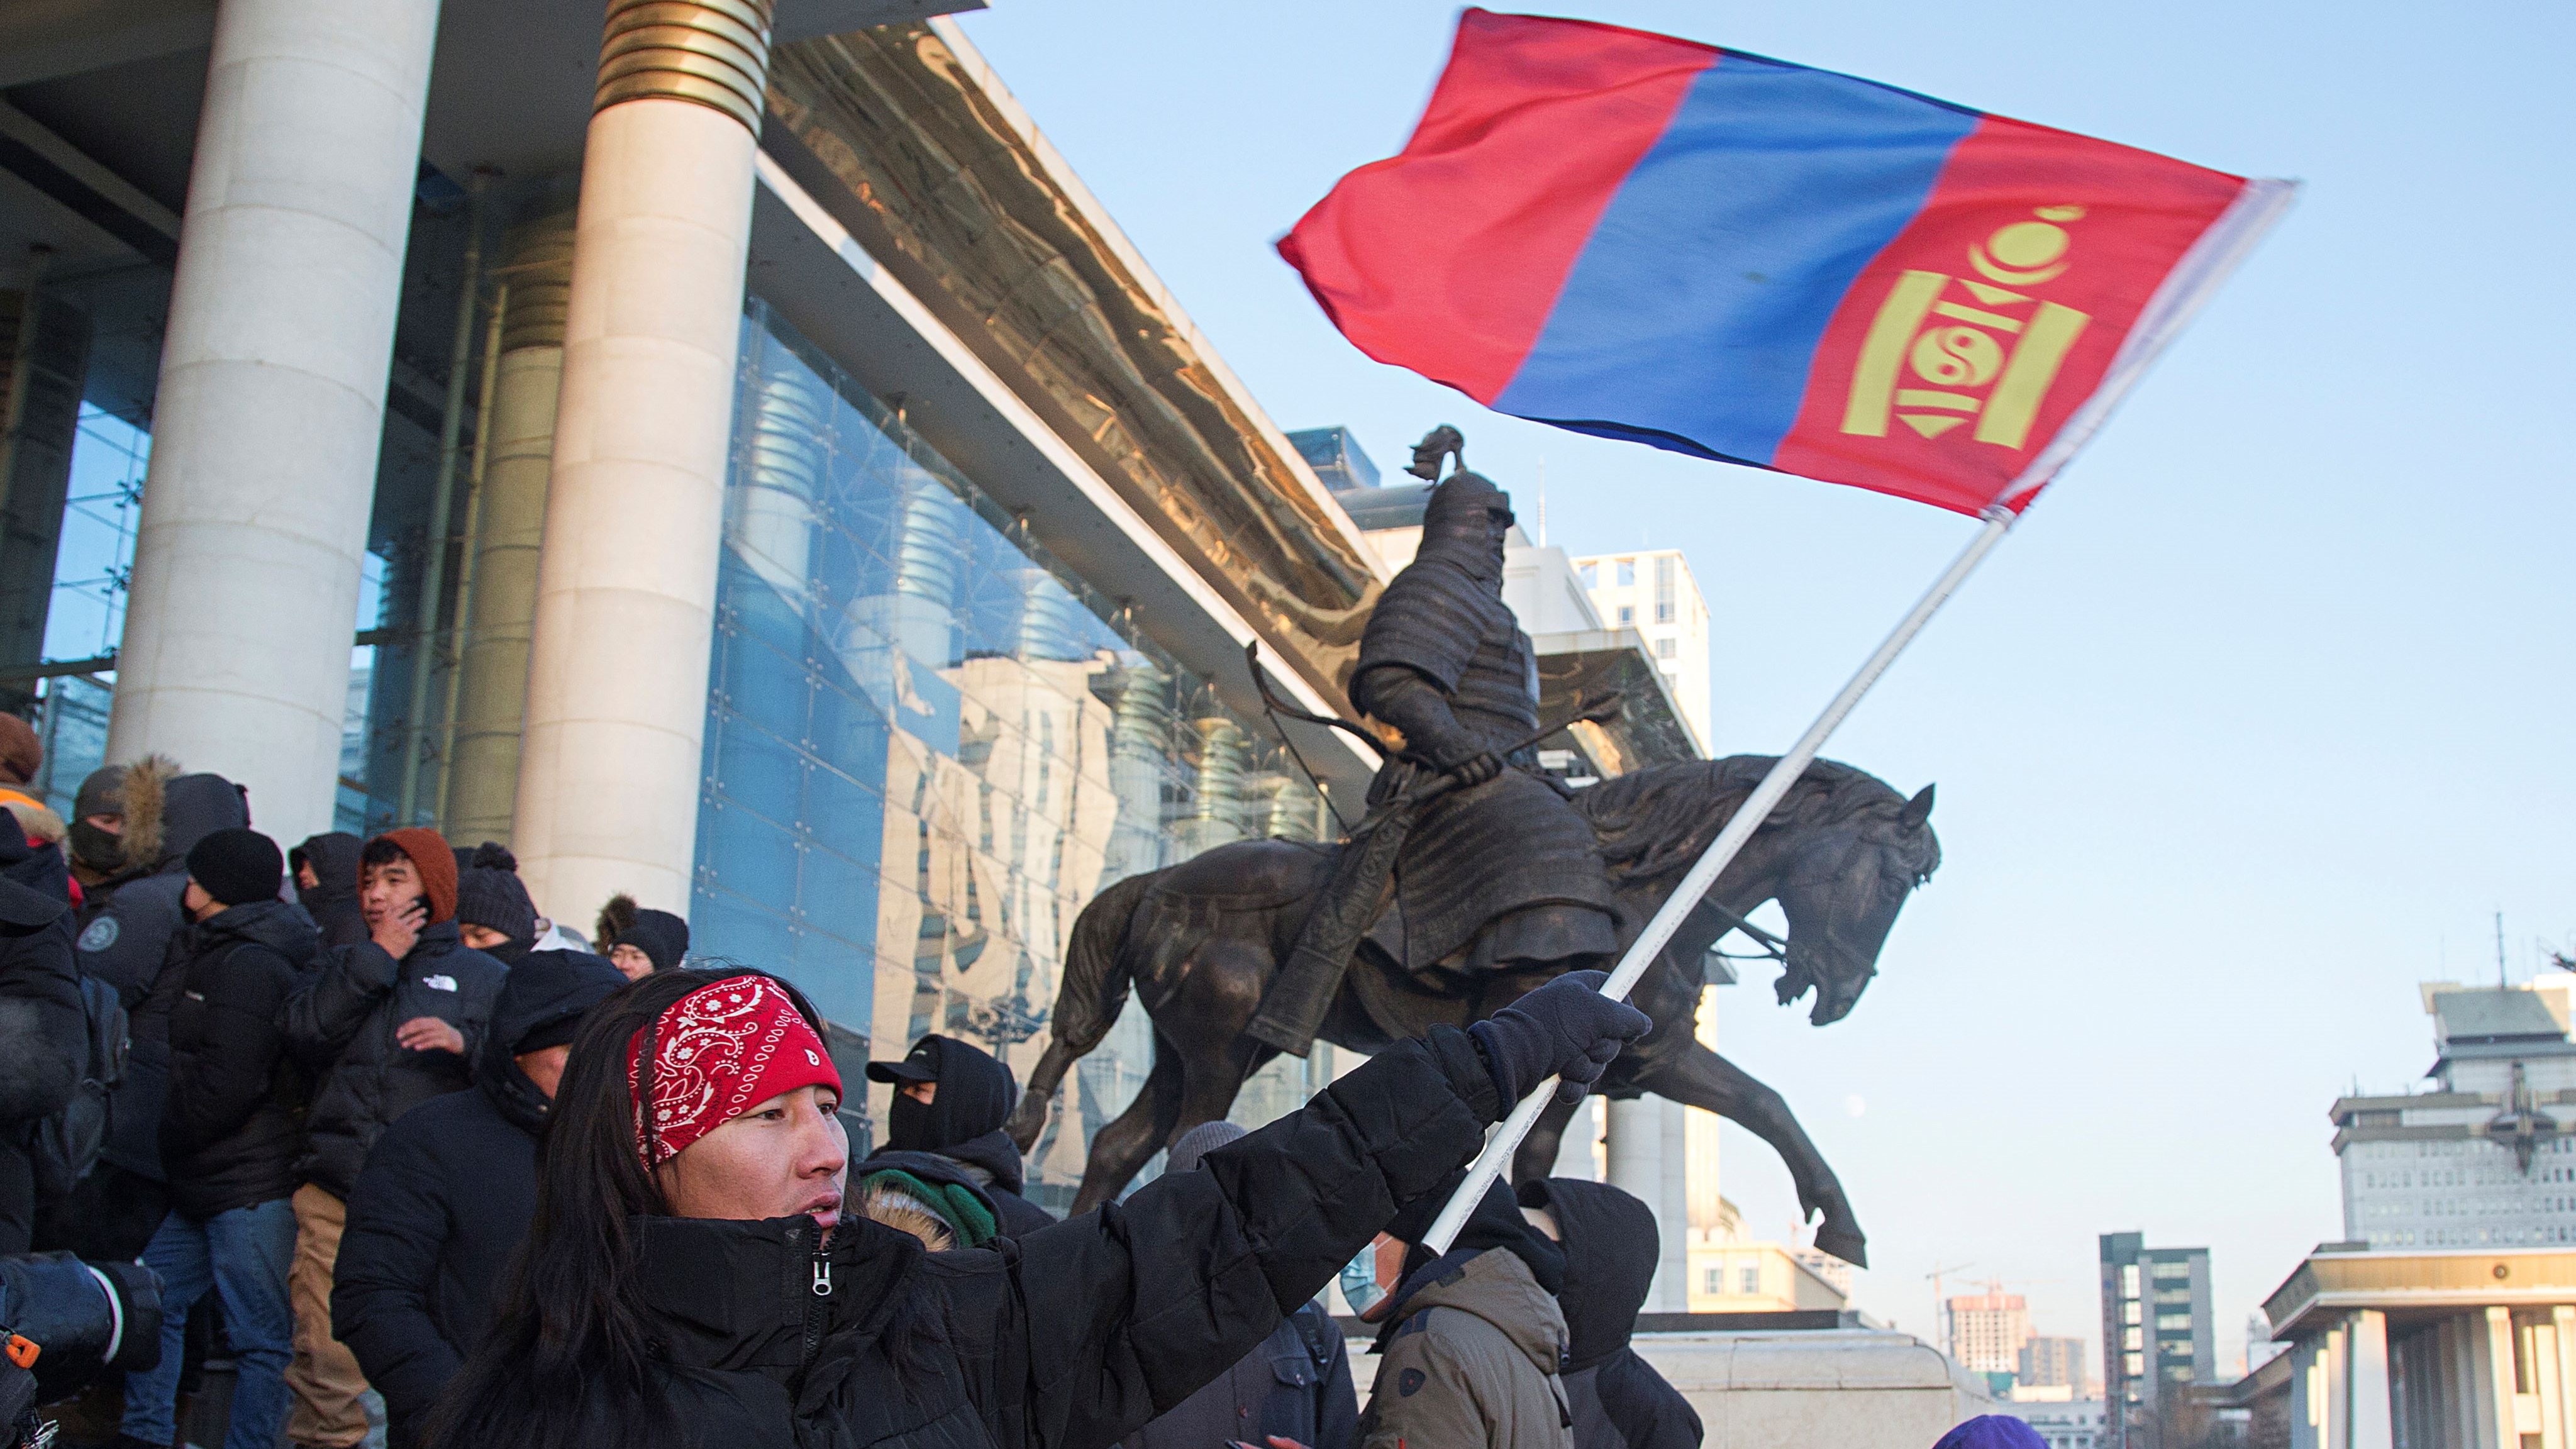 In Mongolia, a difficult political and economic situation is made even more challenging by shifting relations with China and Russia